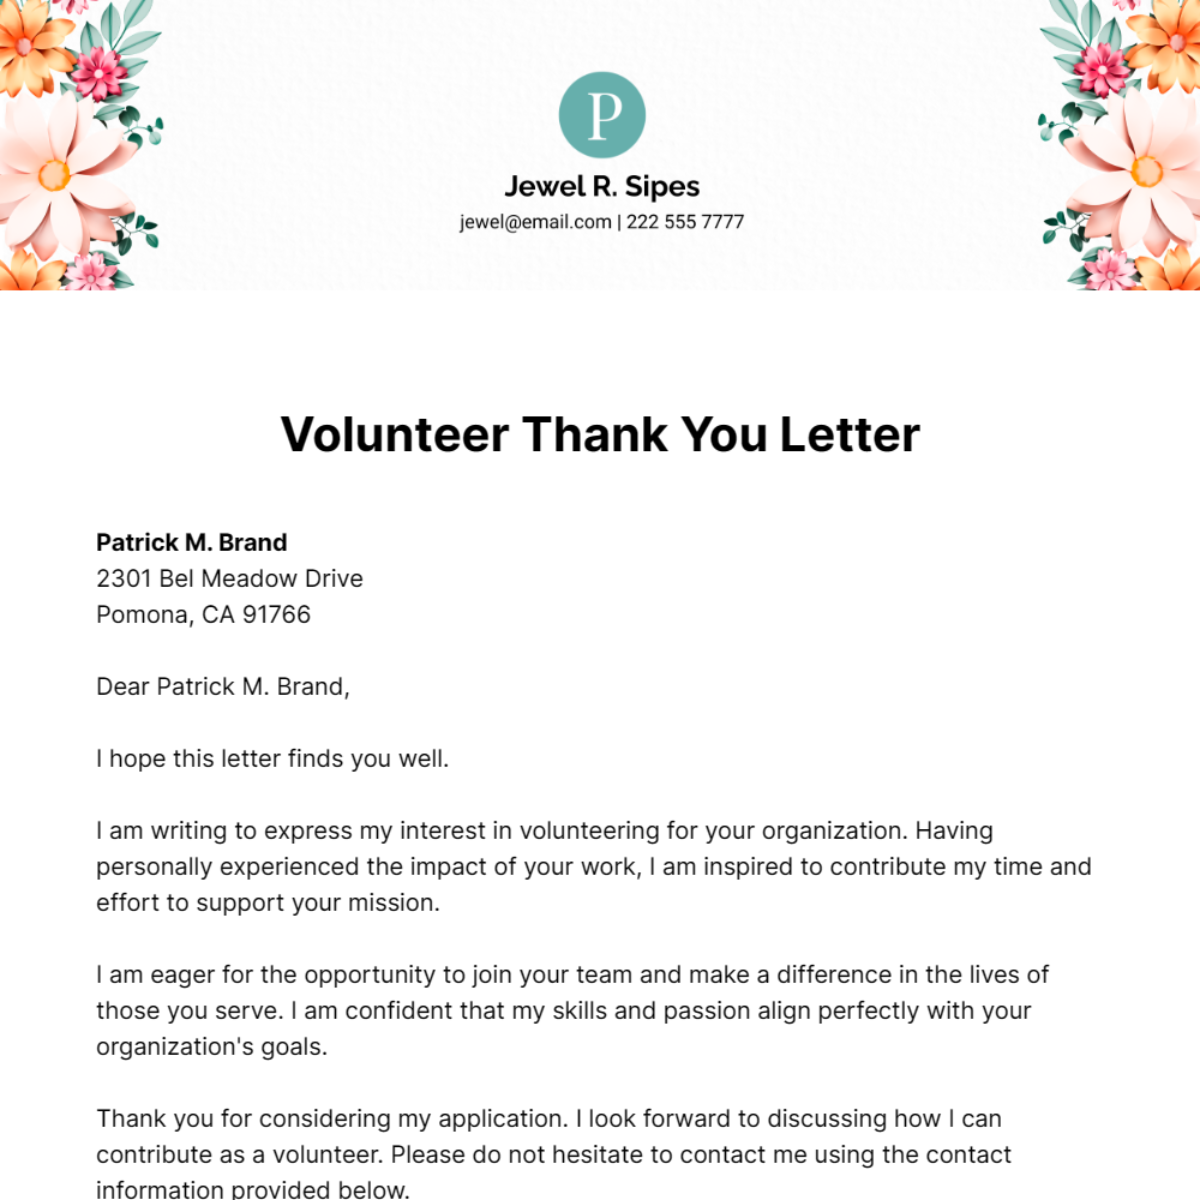 Volunteer Thank You Letter Template